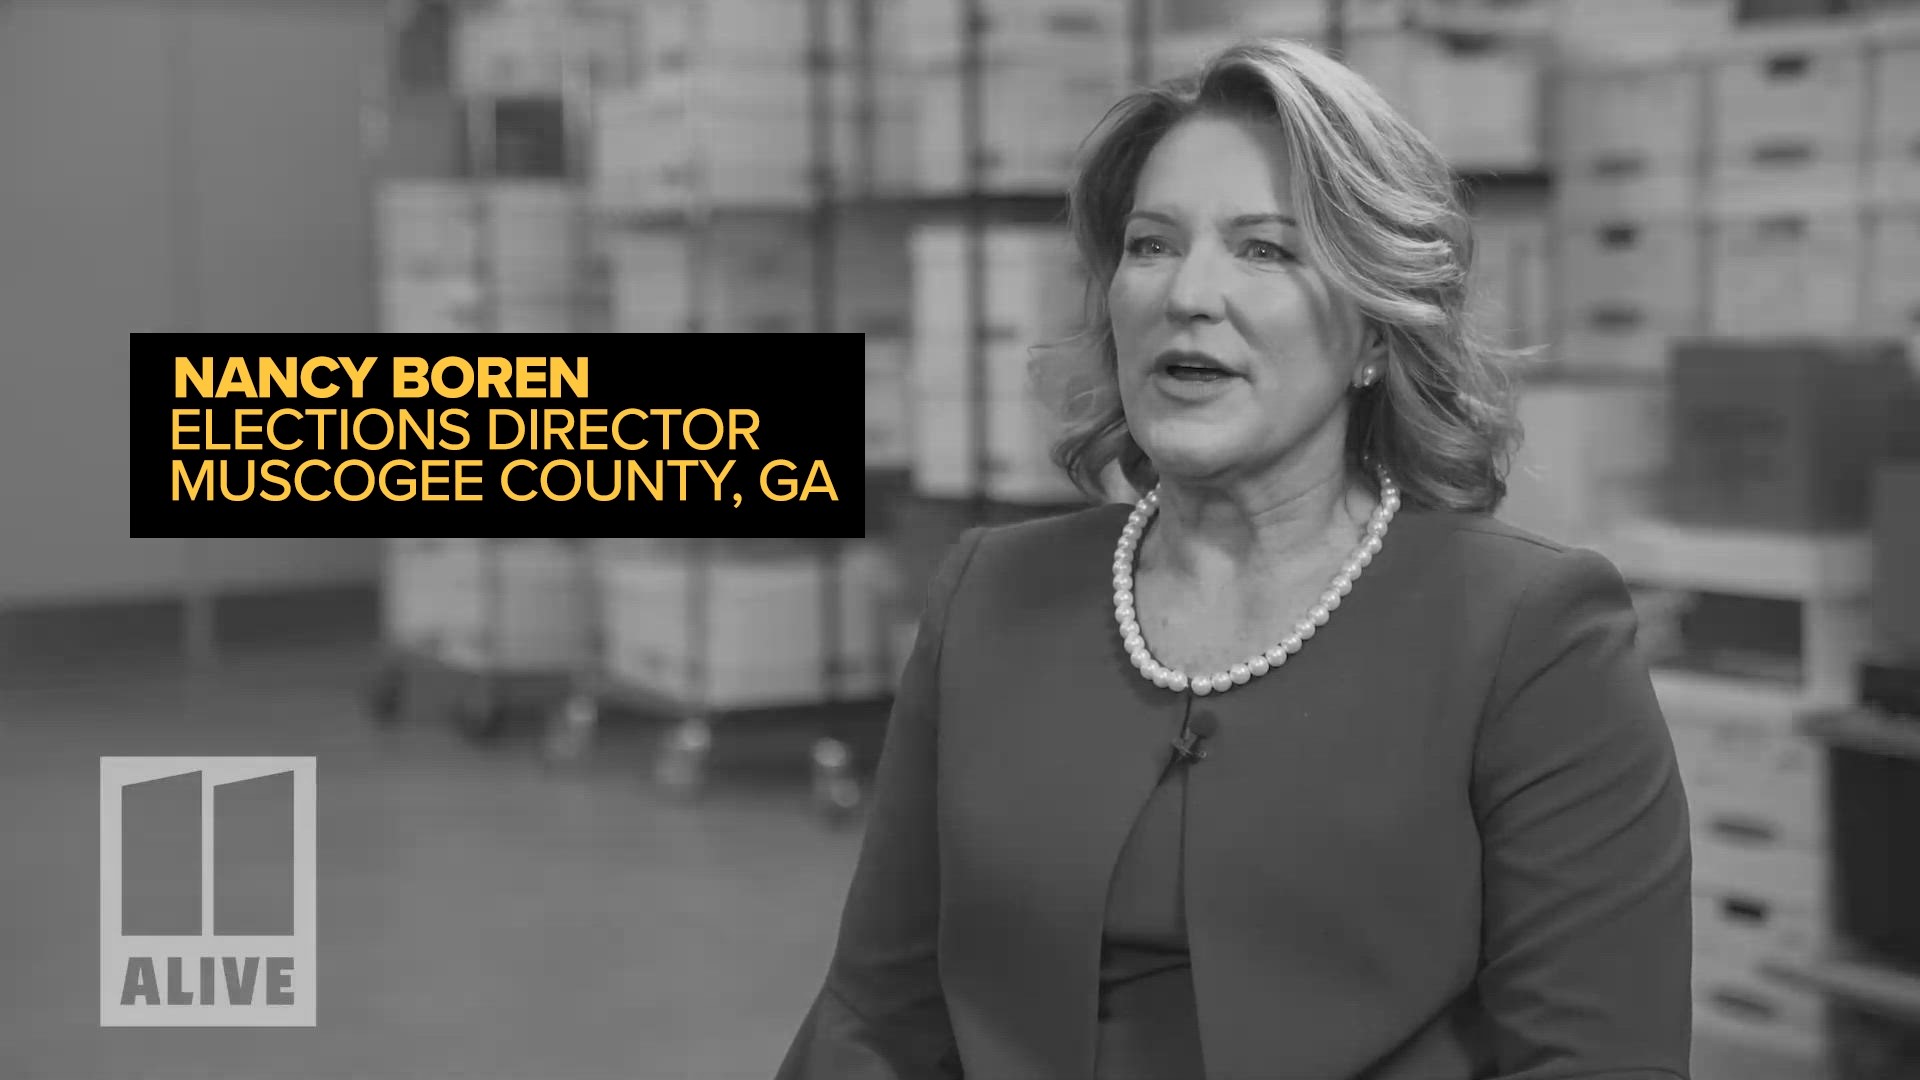 In this extended interview the Columbus- Muscogee County Elections Director Nancy Boren, speaks with Marc Nolan - a voter skeptical of Georgia’s 2020 results.